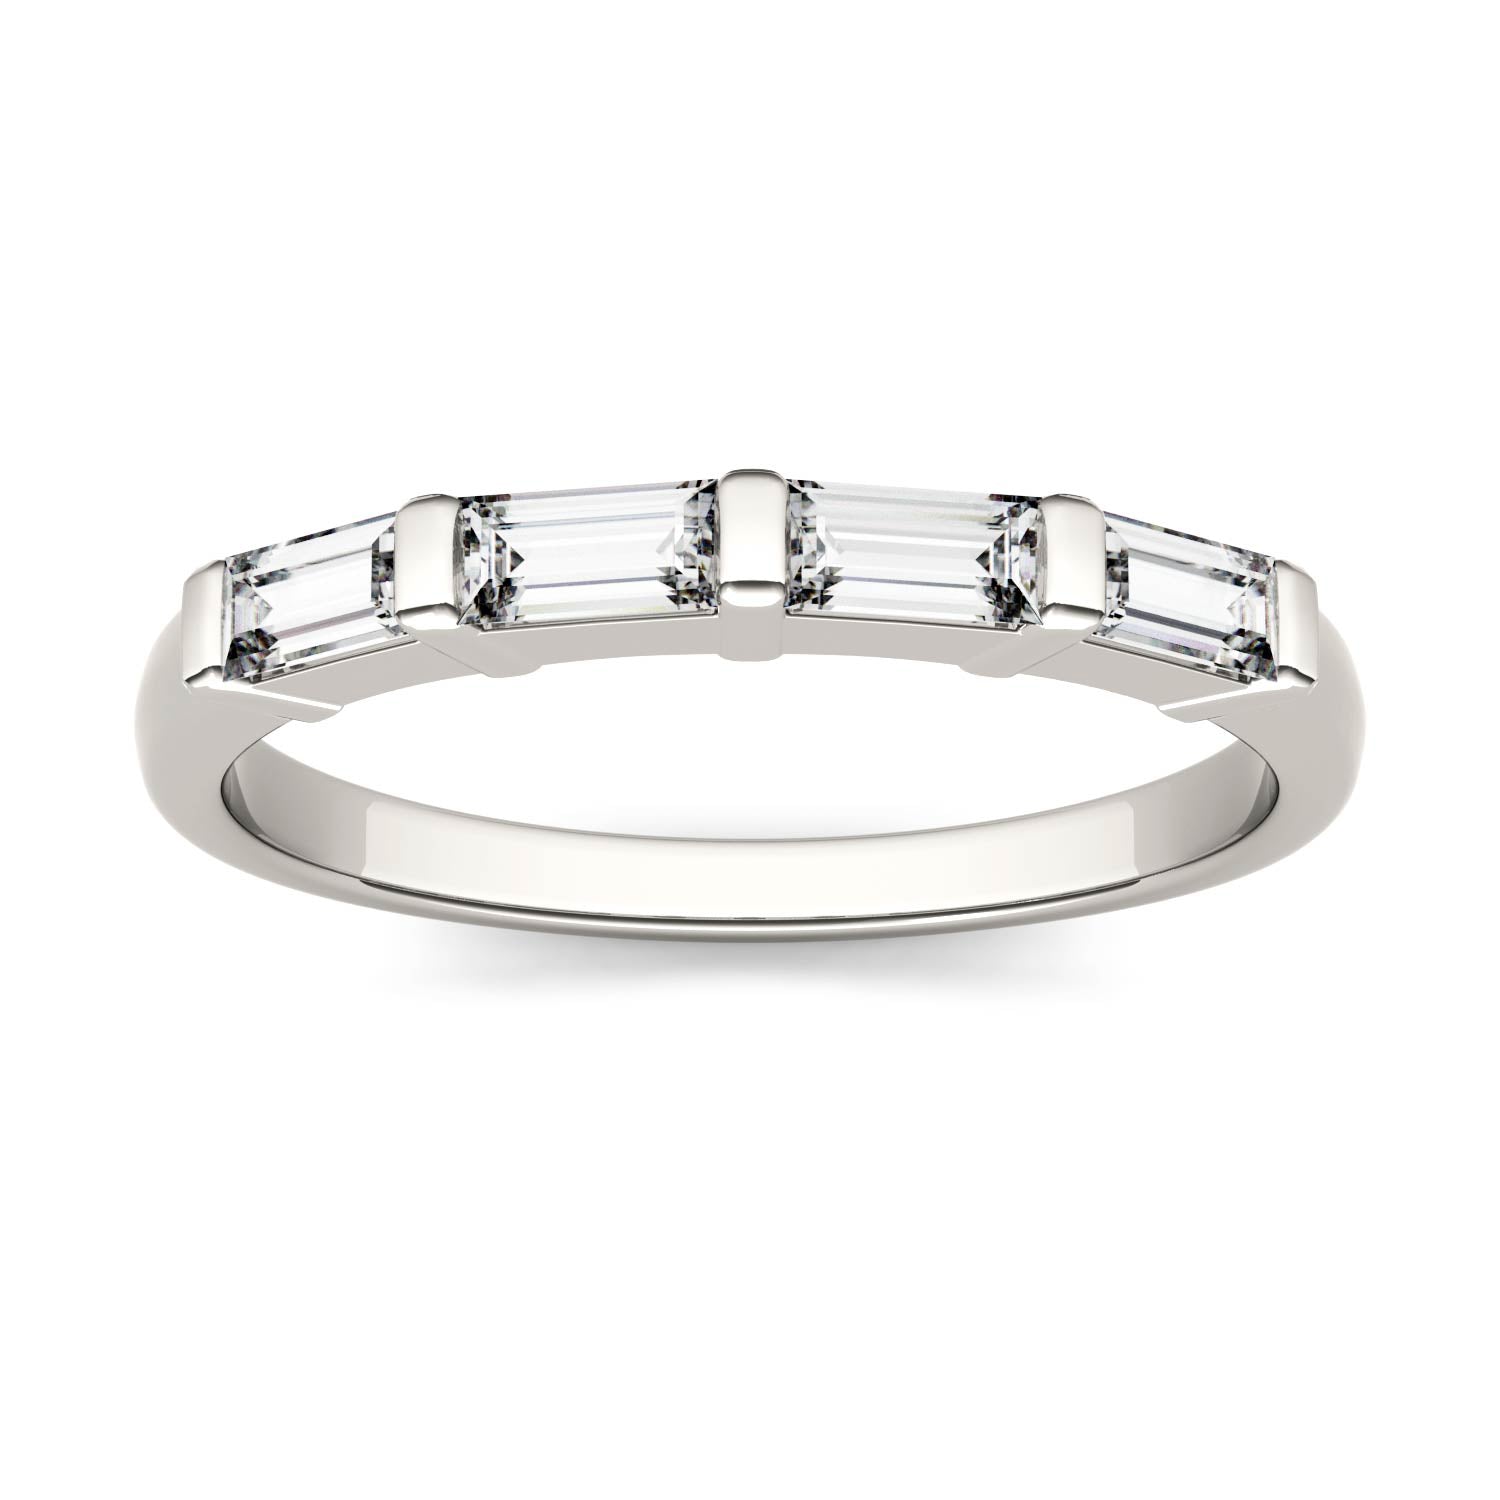 0.46 CTW DEW Straight Baguette Moissanite Stackable Ring in 14K White Gold